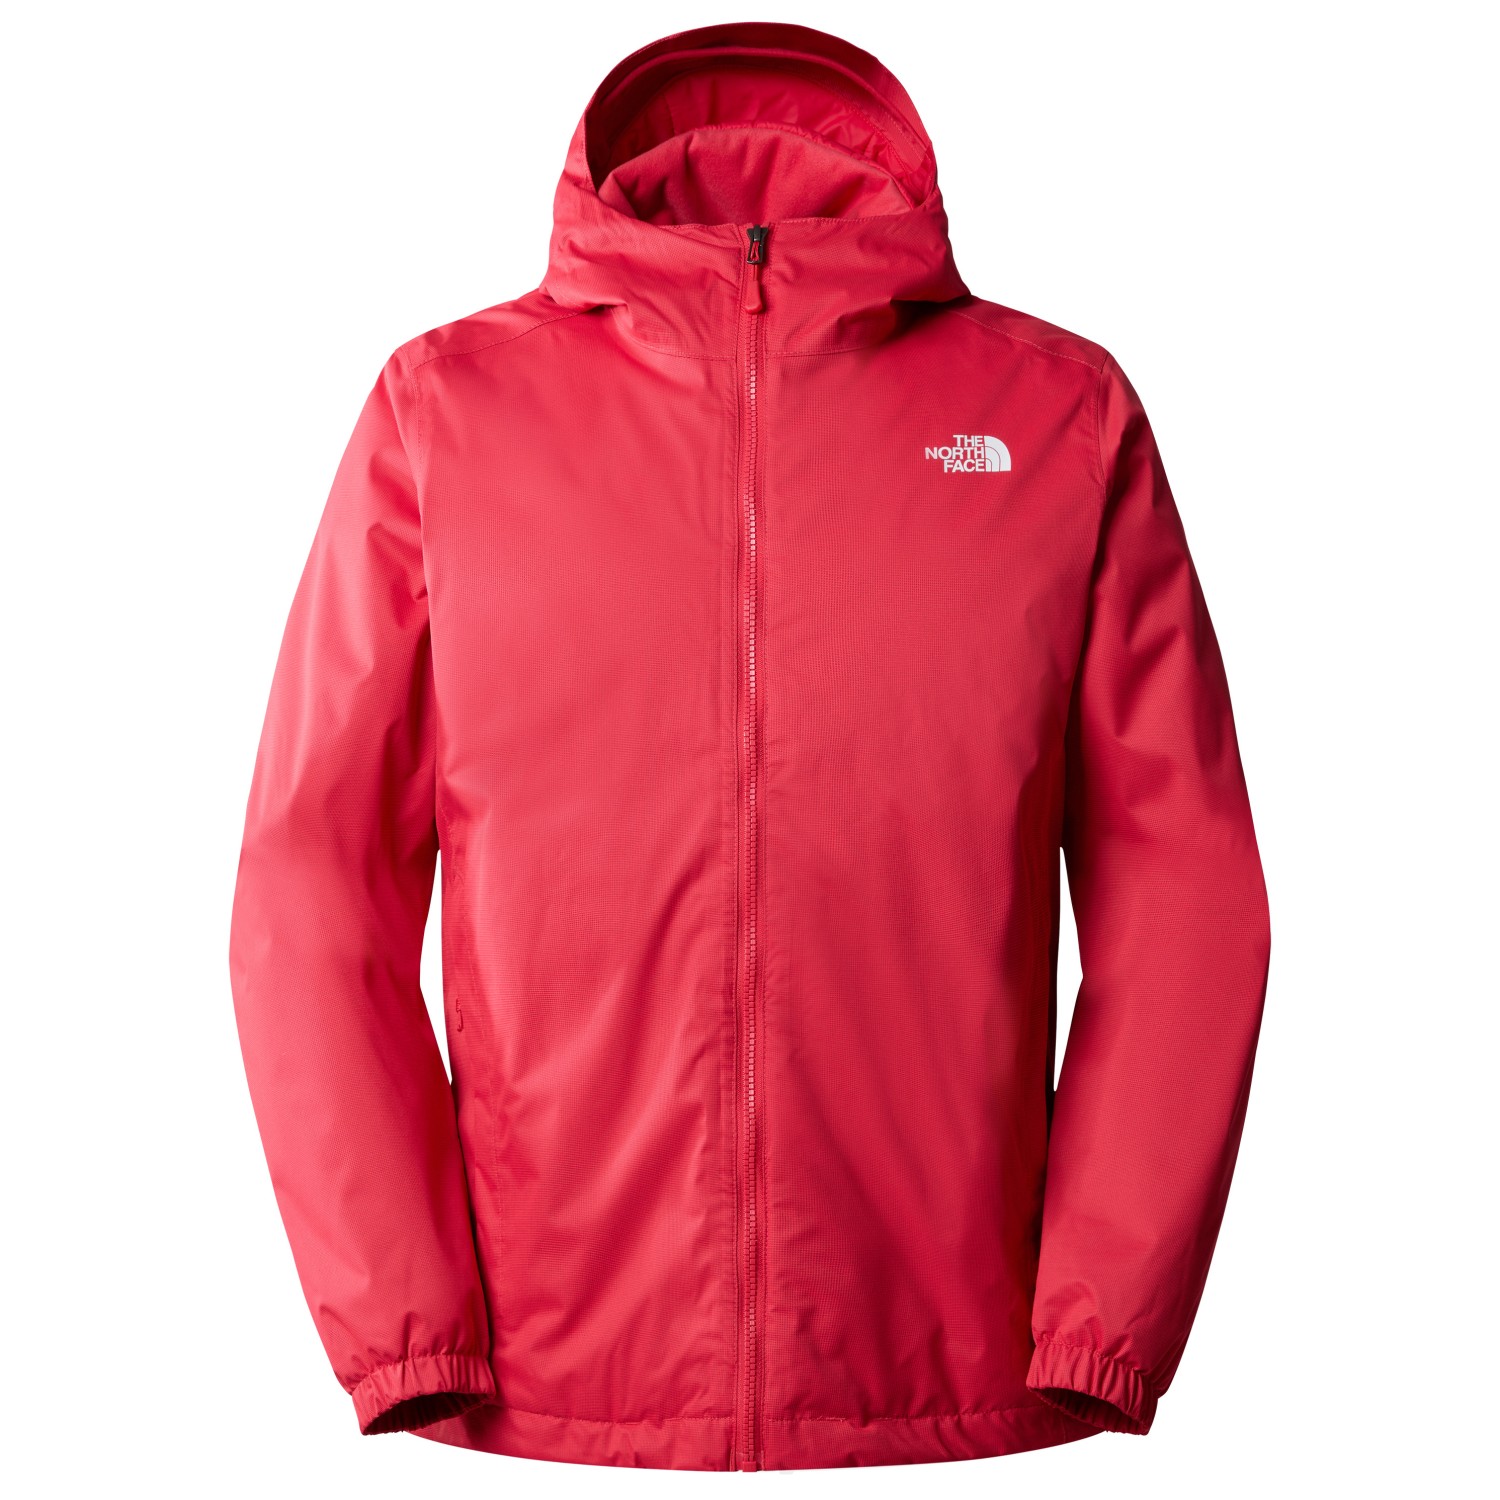 Зимняя куртка The North Face Quest Insulated, цвет Clay Red Black Heather куртка the north face quest insulated черный